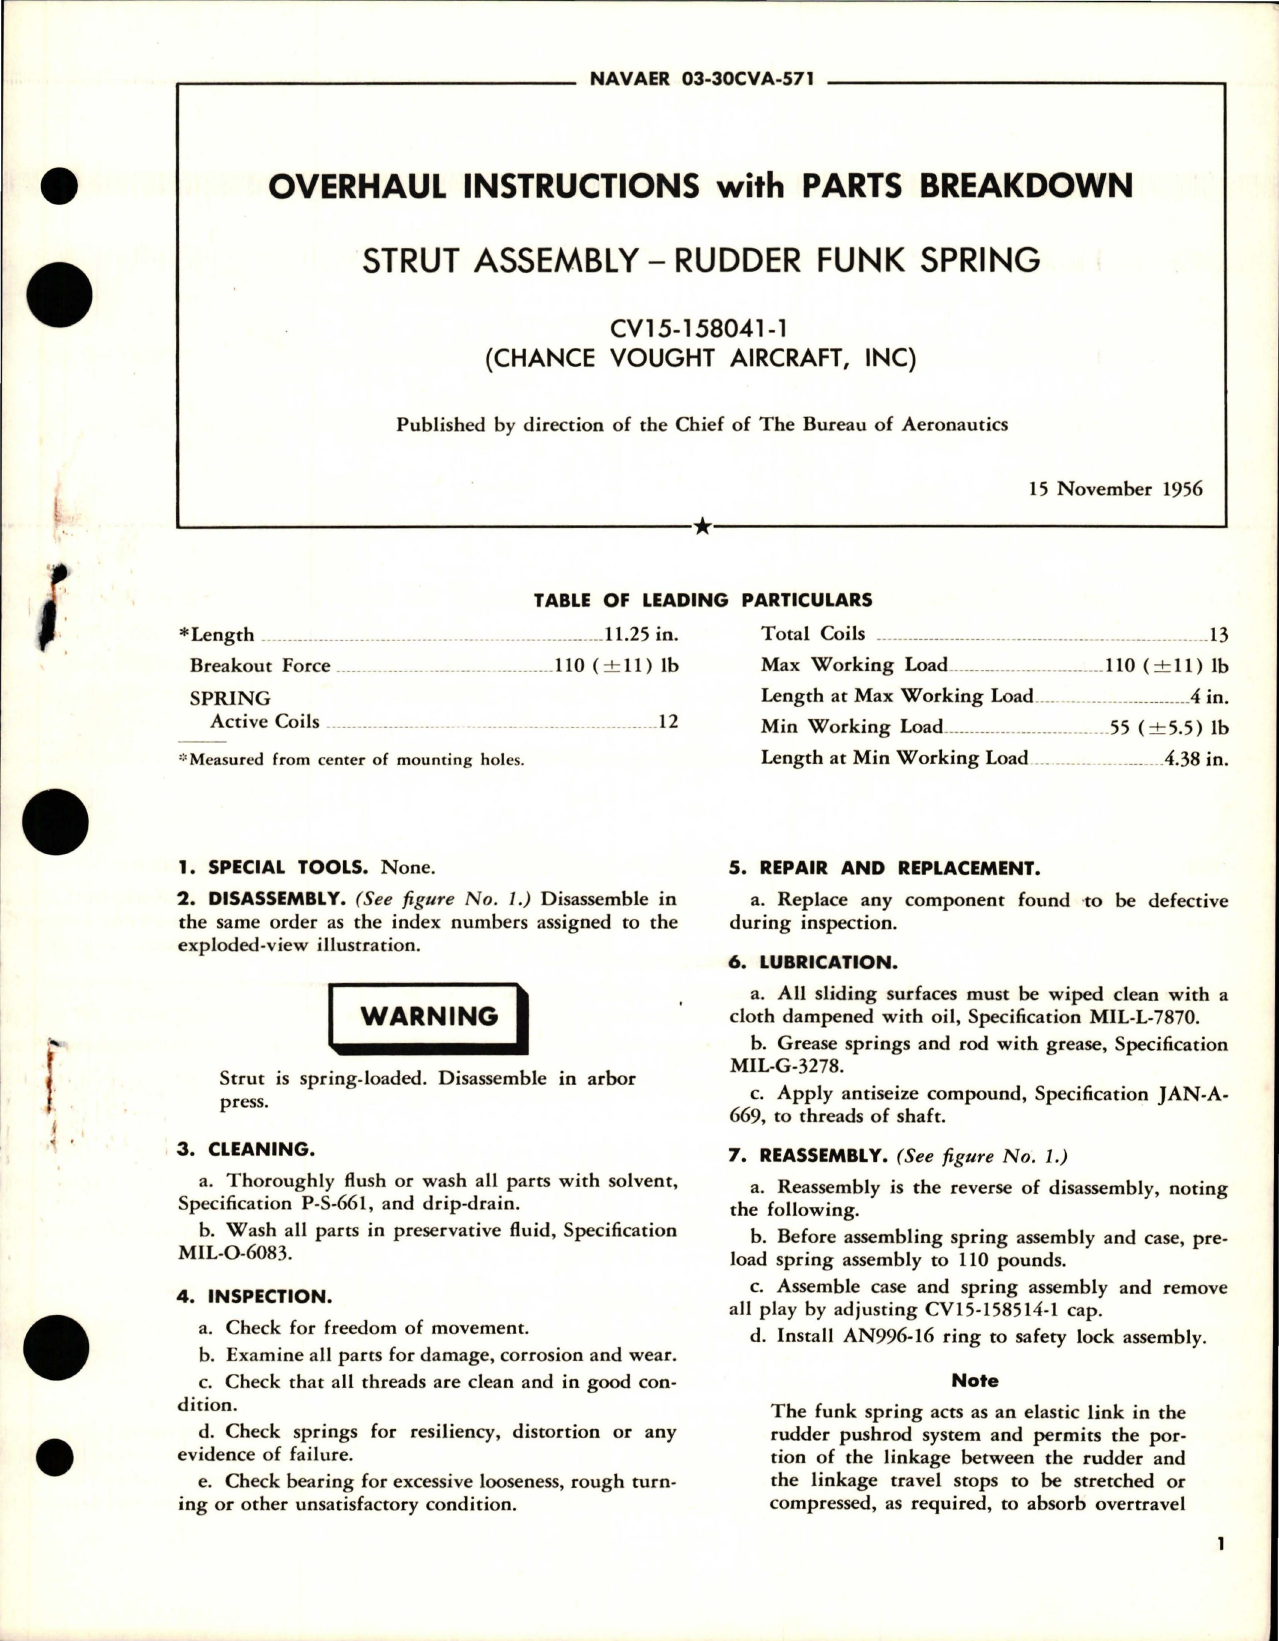 Sample page 1 from AirCorps Library document: Overhaul Instructions with Parts Breakdown for Rudder Funk Spring Strut Assembly - CV15-158041-1